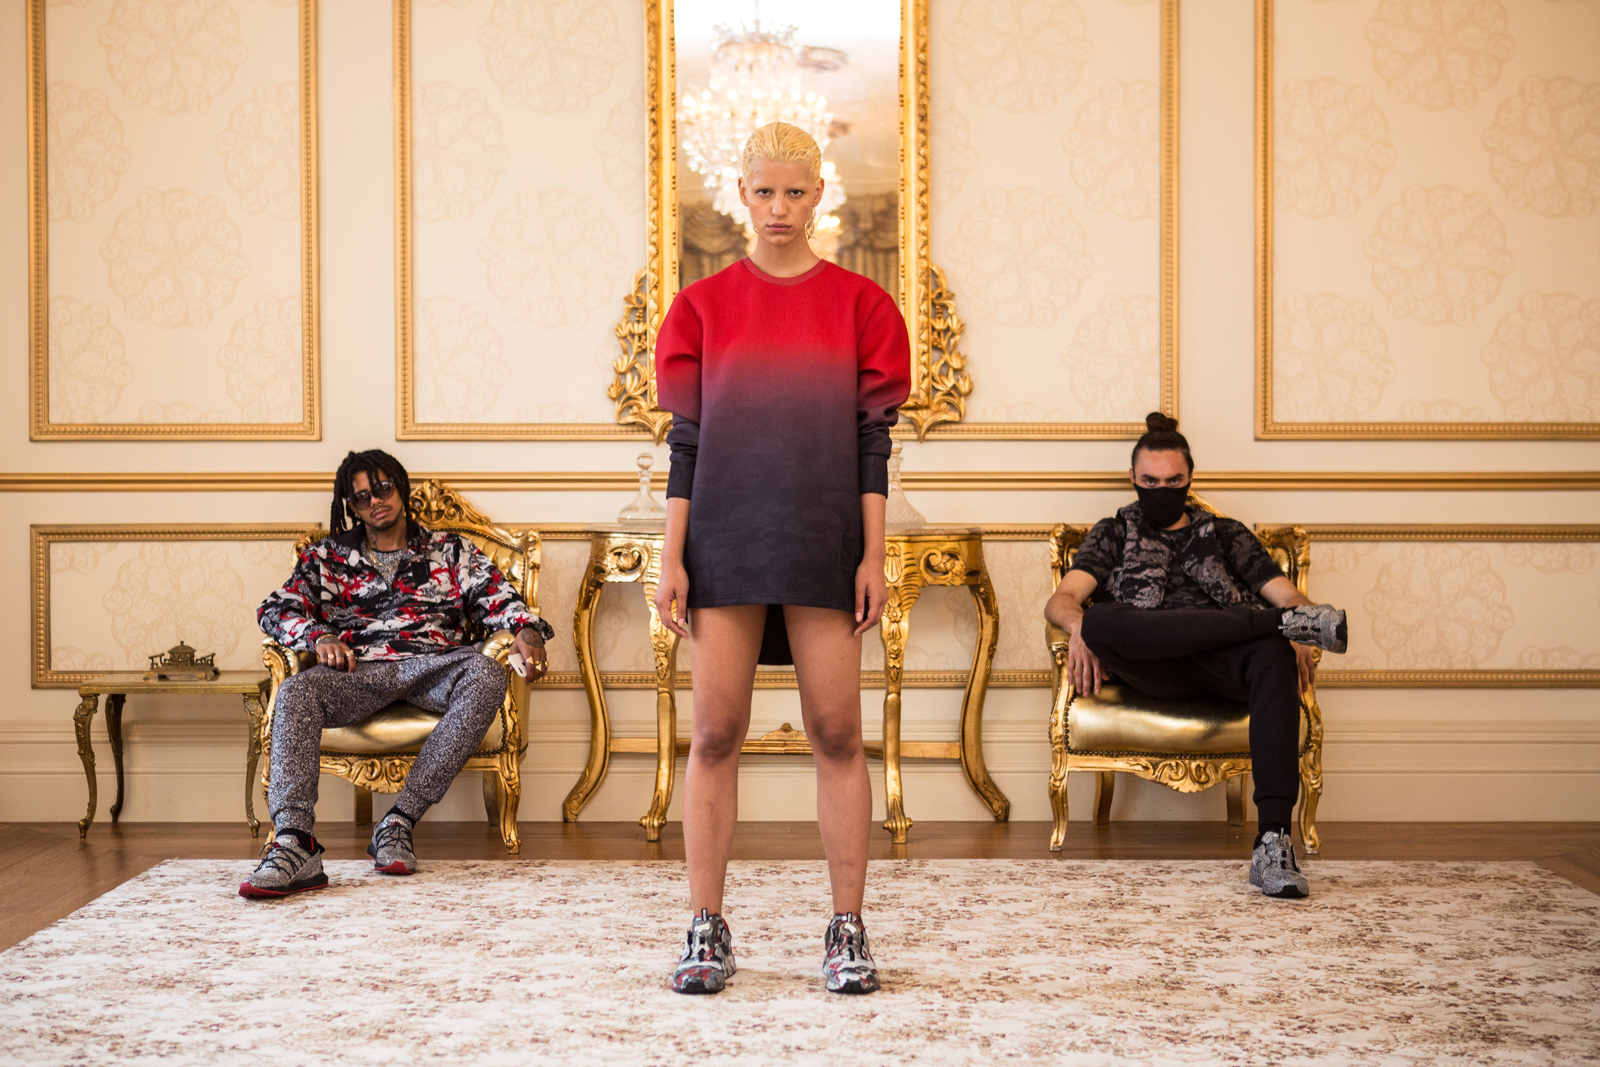 Trapstar Marks The Release of PUMA x Trapstar Collab With Short Film ‘Unruly’